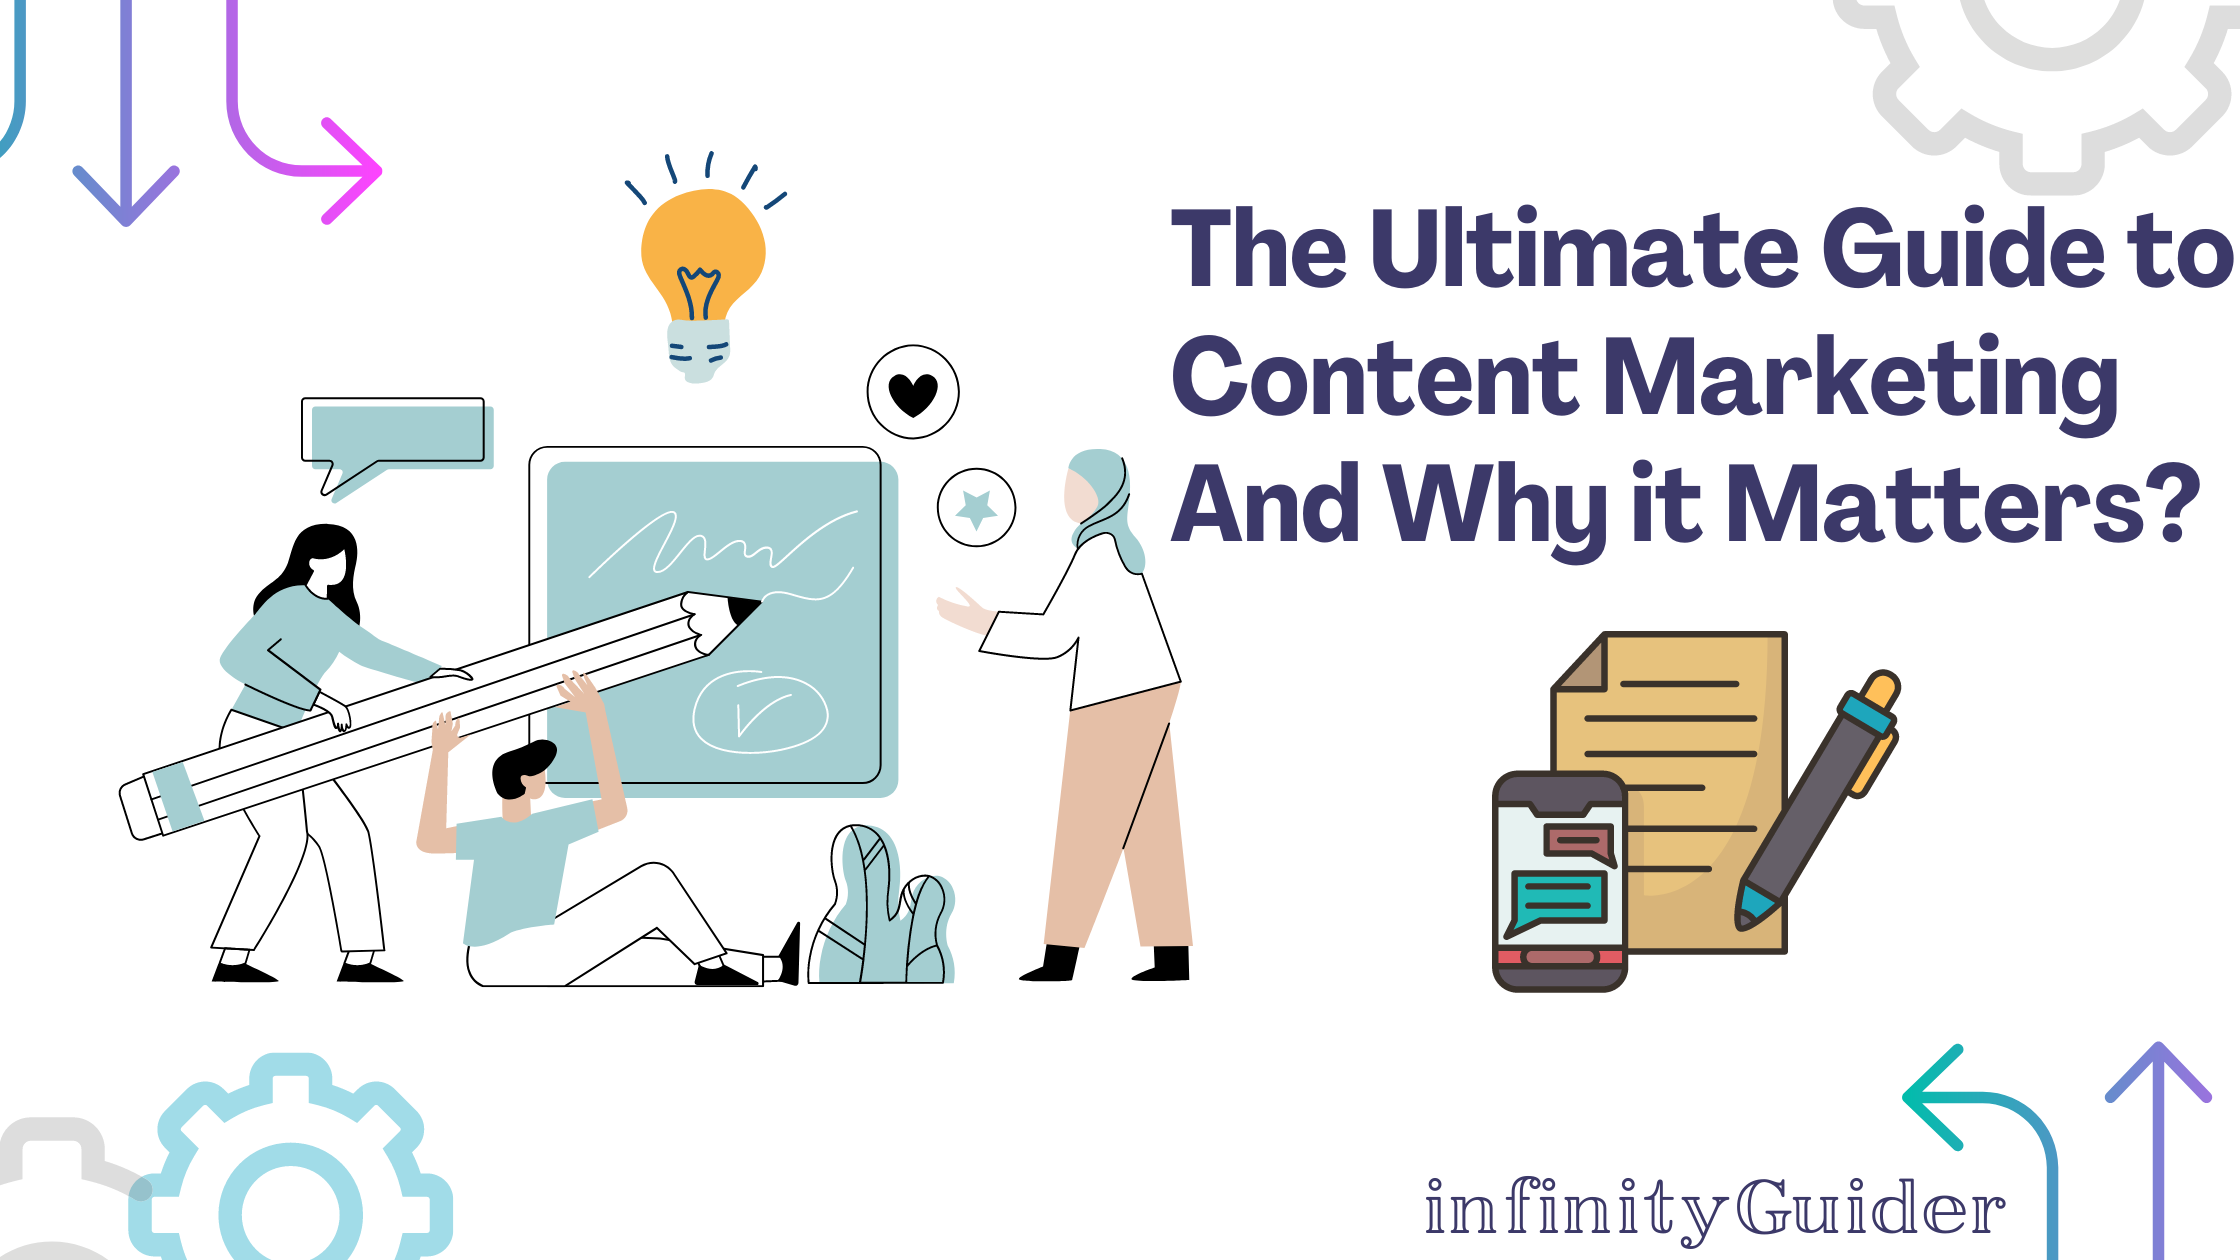 The Ultimate Guide to Content Marketing And Why it Matters